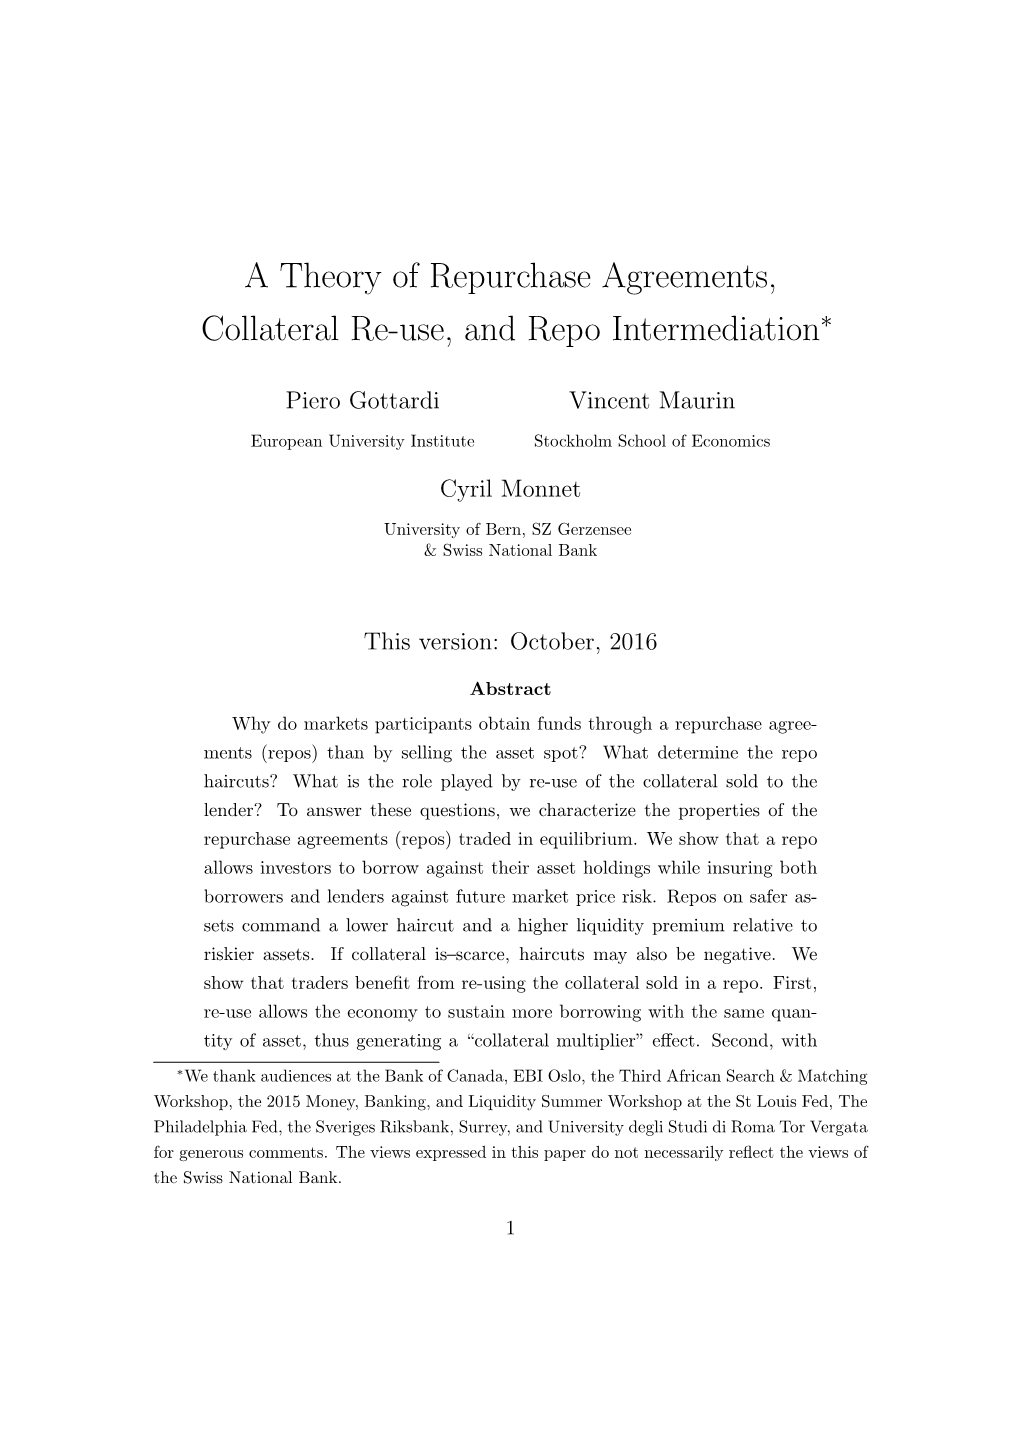 A Theory of Repurchase Agreements, Collateral Re-Use, and Repo Intermediation∗